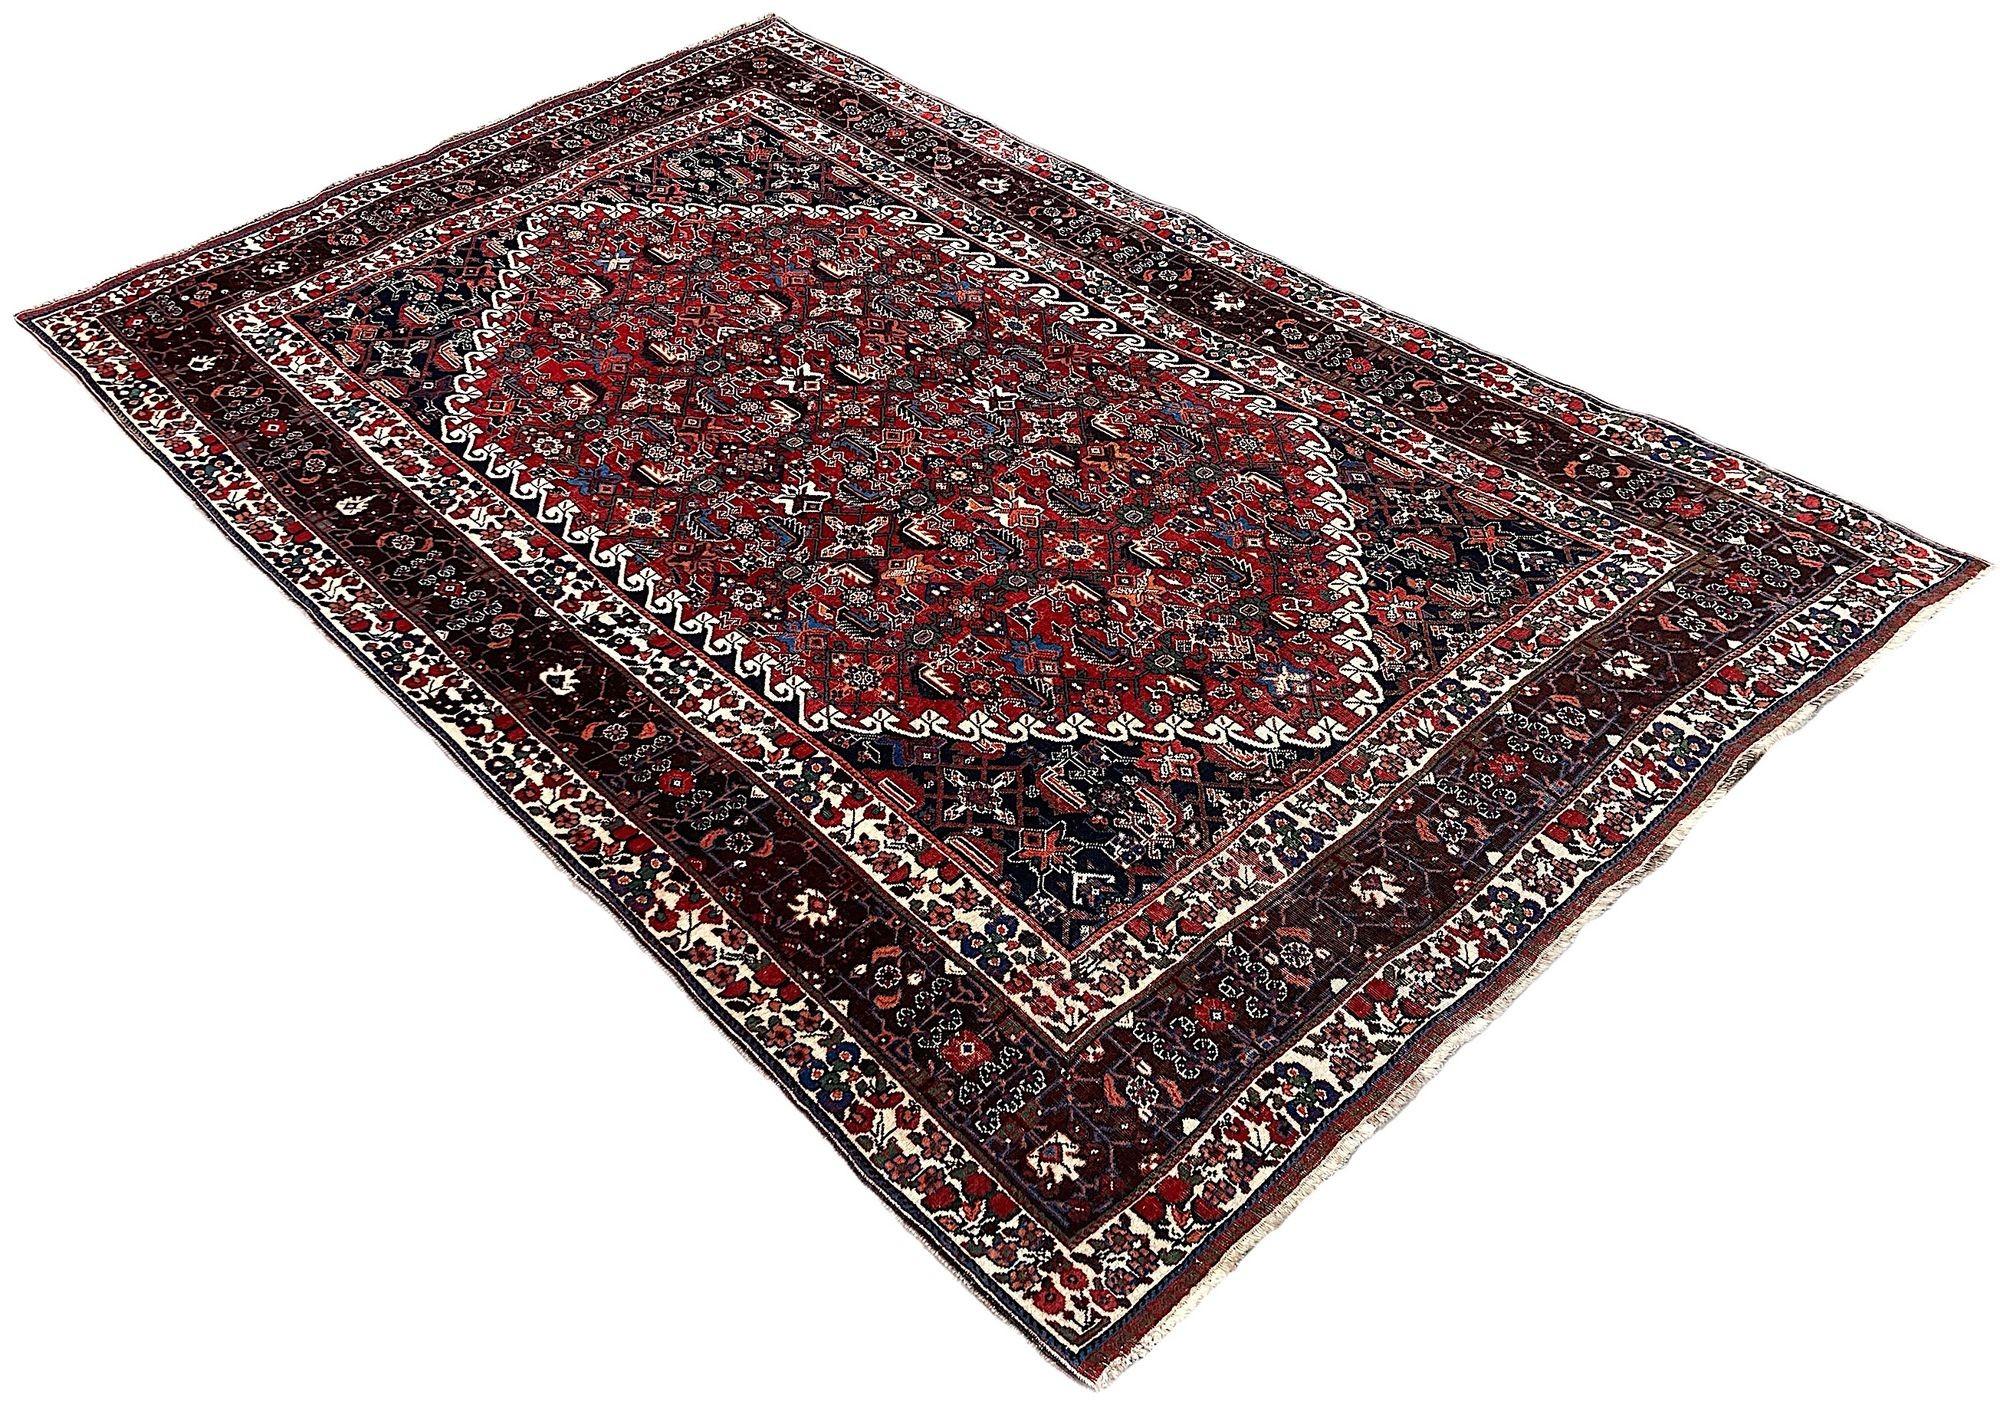 Antique Qashqai Rug 2.61m x 1.65m In Good Condition For Sale In St. Albans, GB